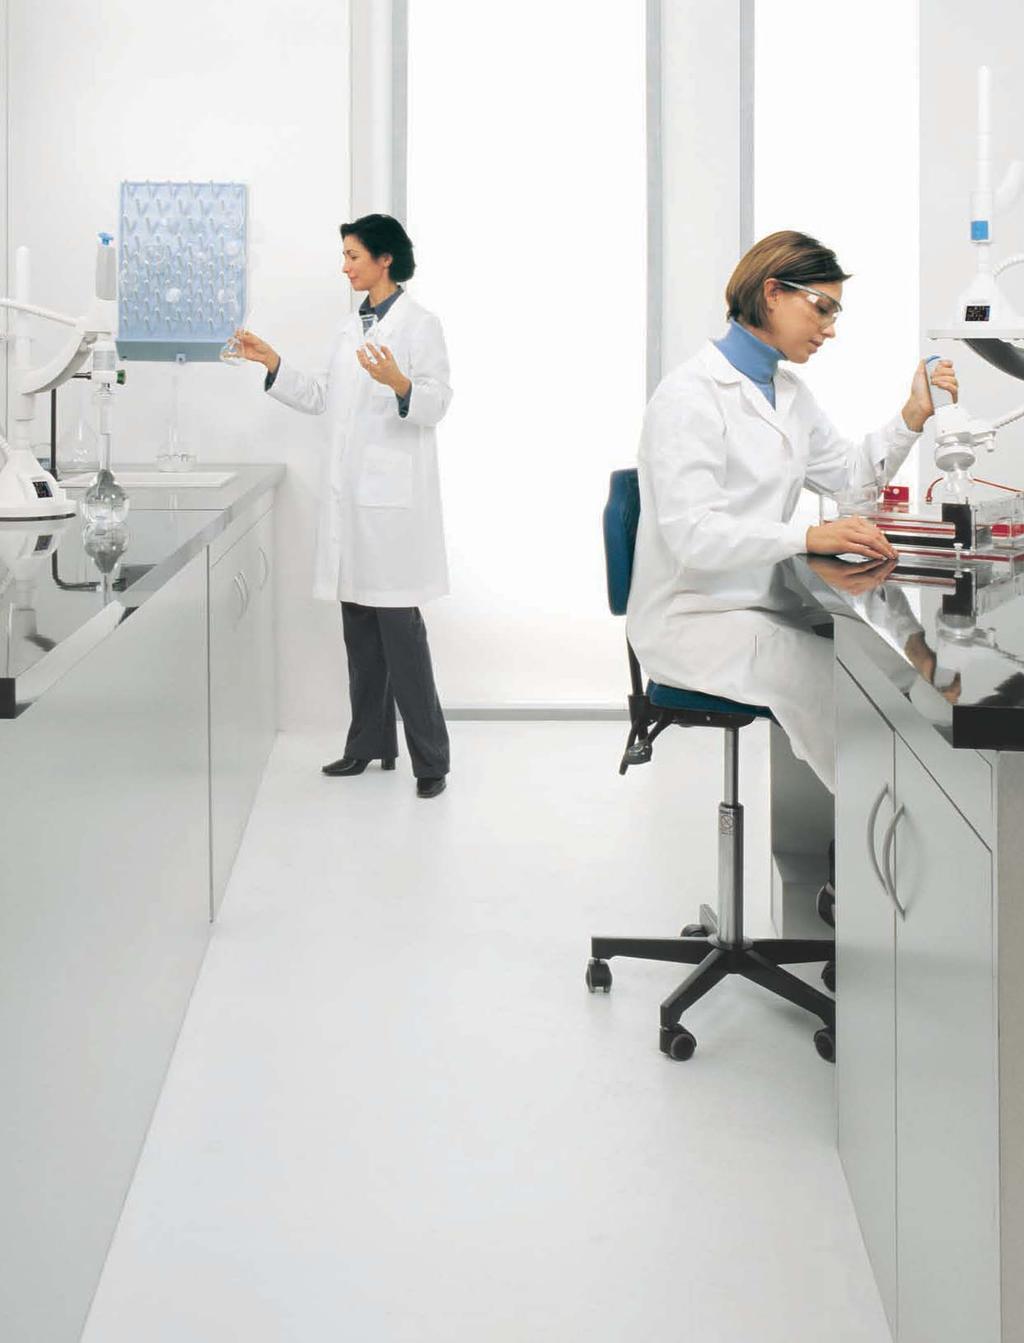 Can you envision a laboratory environment where the ultrapure water source is flexible enough to support a variety of daily activities?